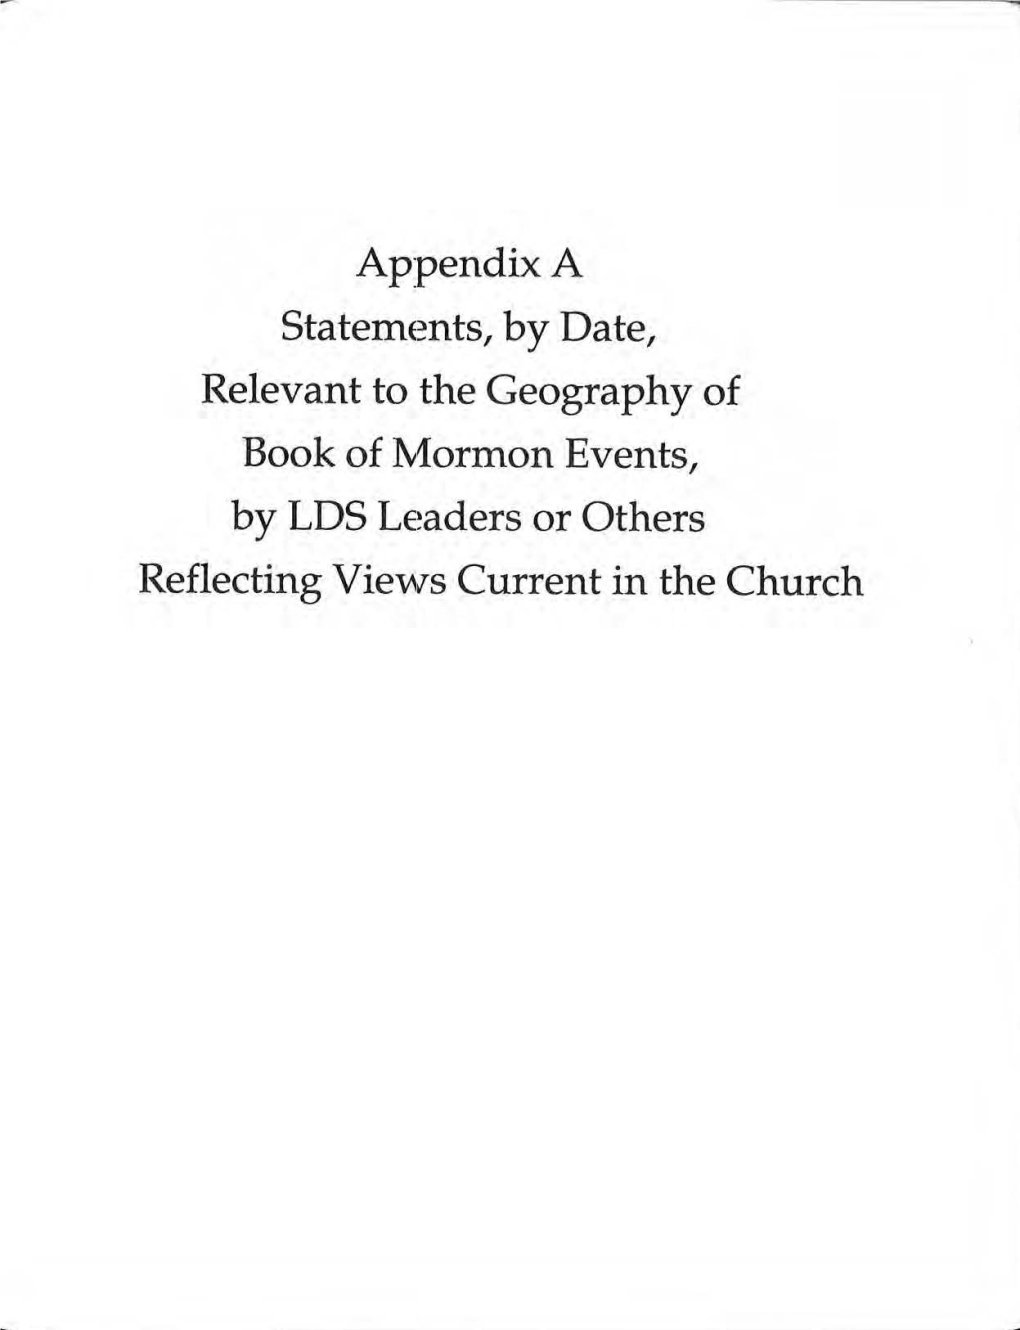 Ap:Pendixa Statements, by Date, Relevant to the Geography of Book of Rv1ormon Events, by LDS Leaders Or Others Reflecting Viev'rs Current in the Church Jiii>